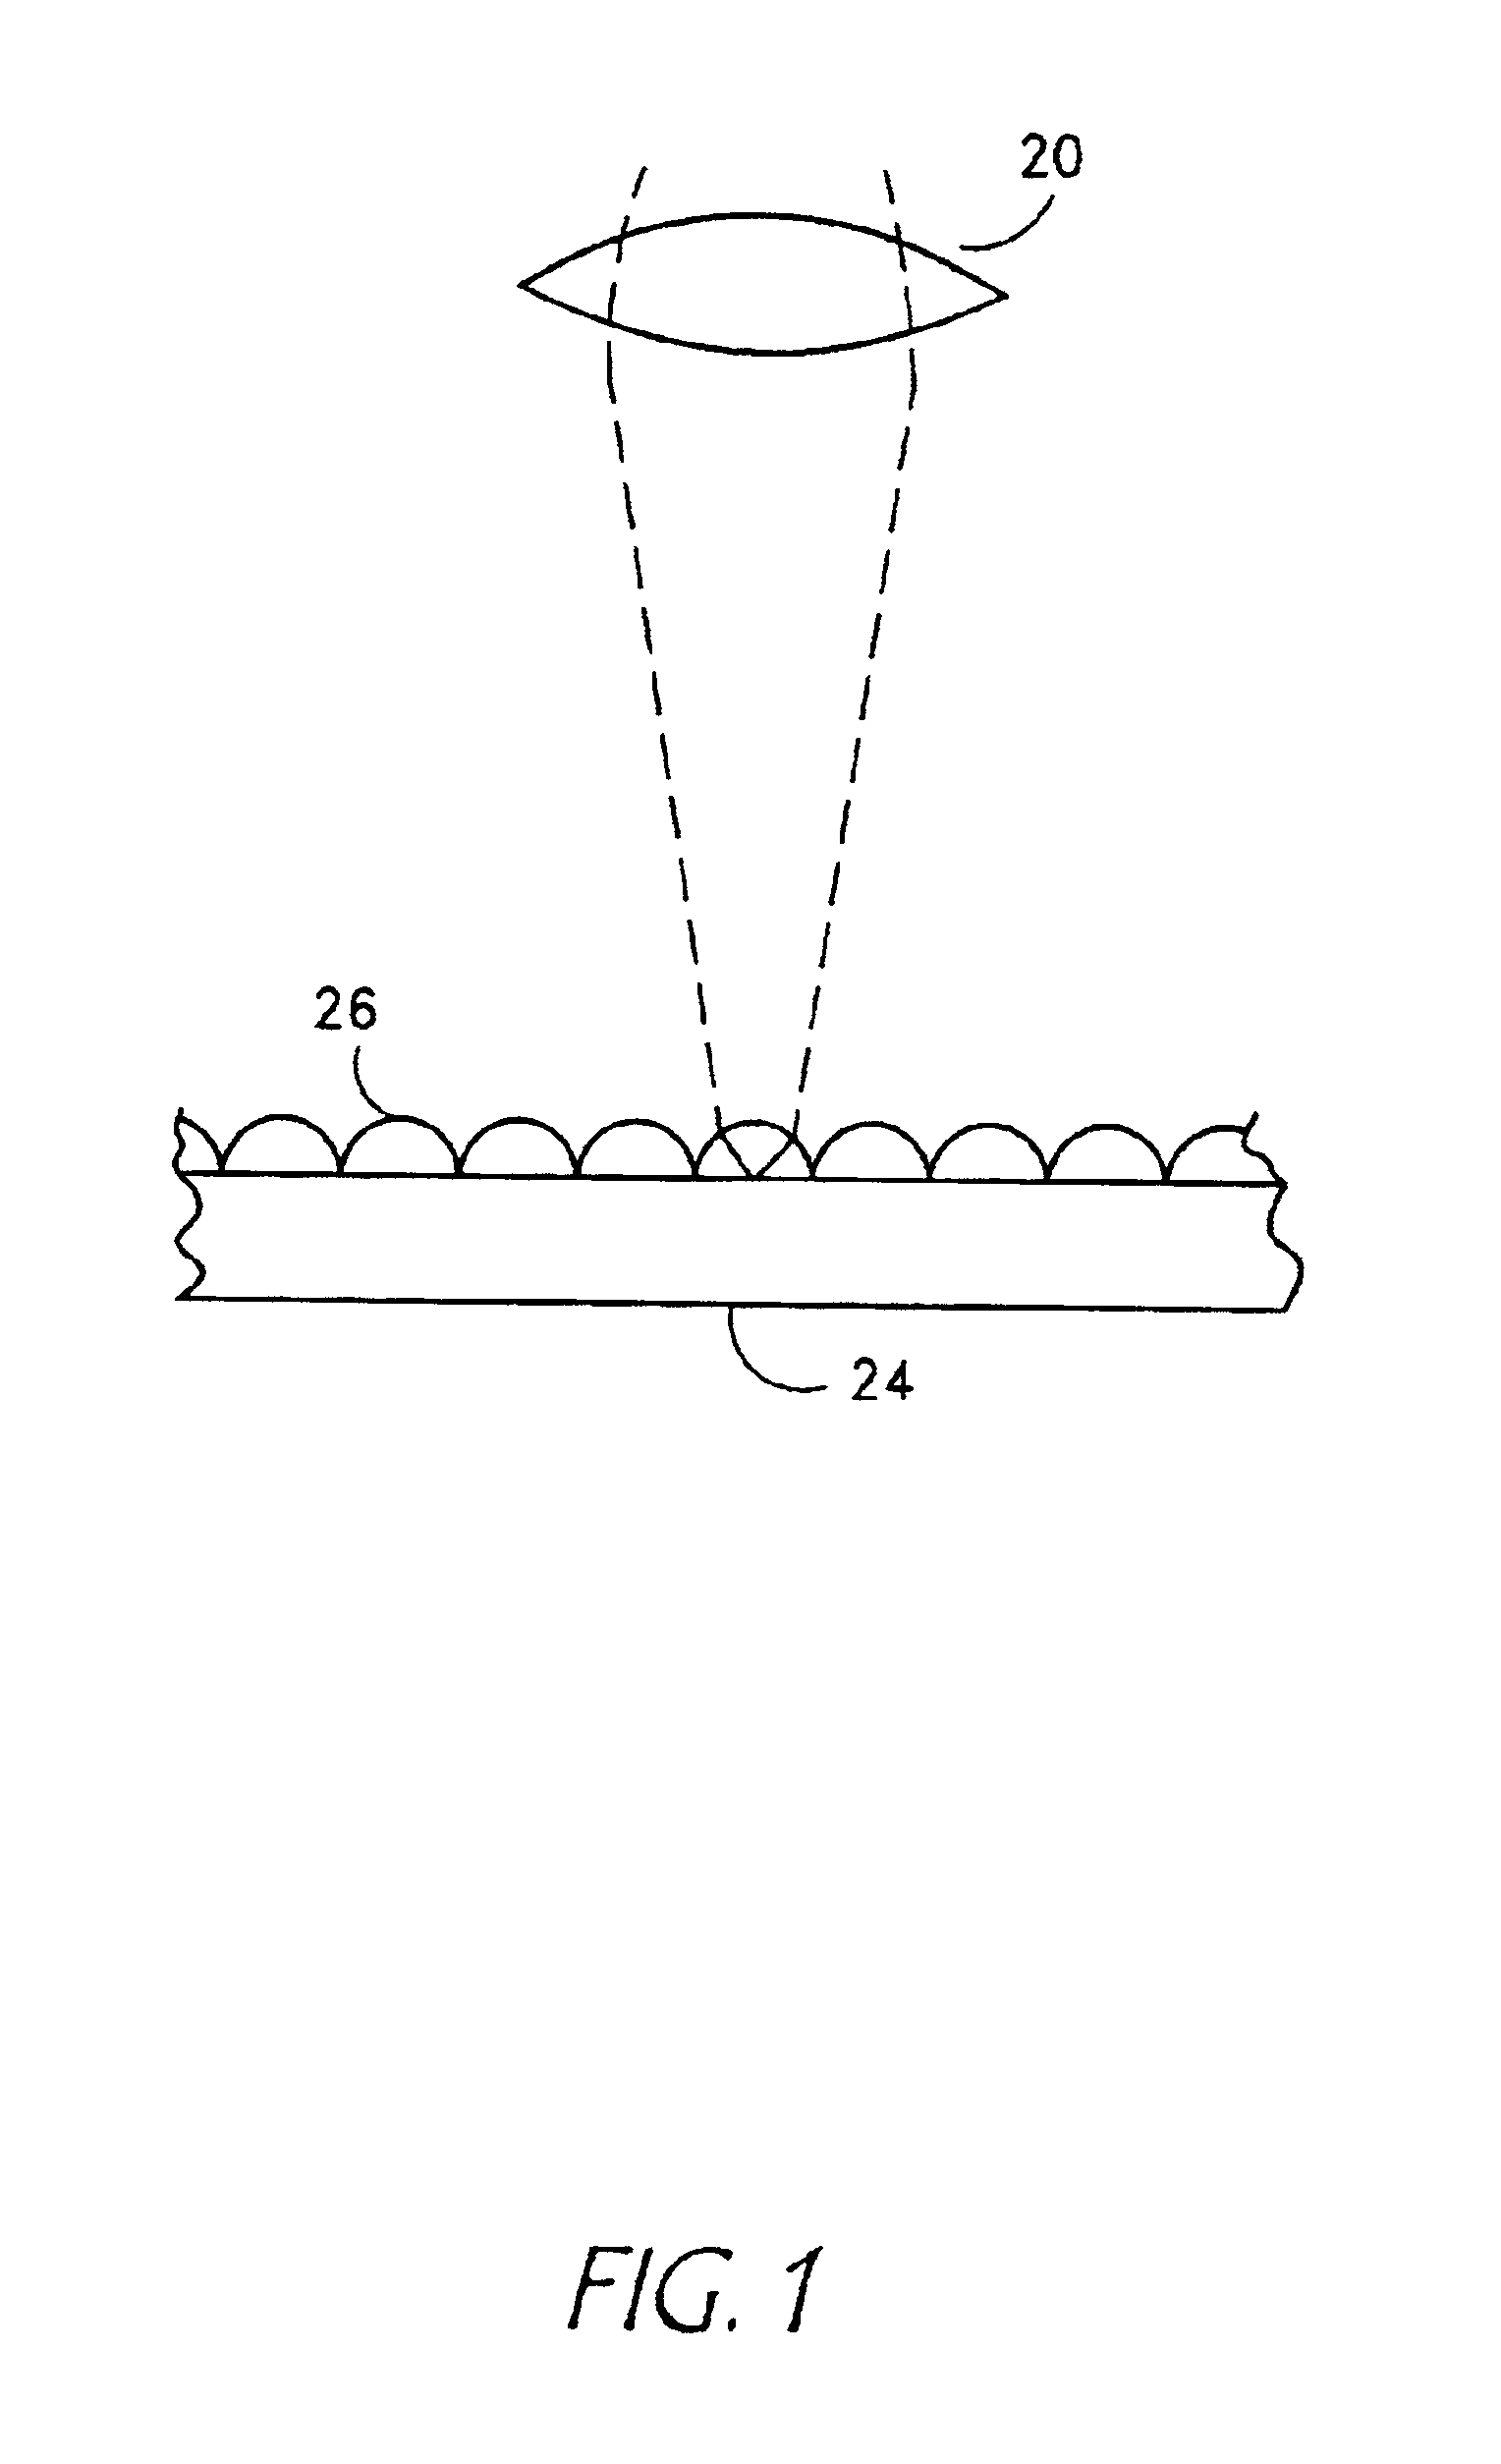 Method of fabricating sub-micron hemispherical and hemicylidrical structures from non-spherically shaped templates